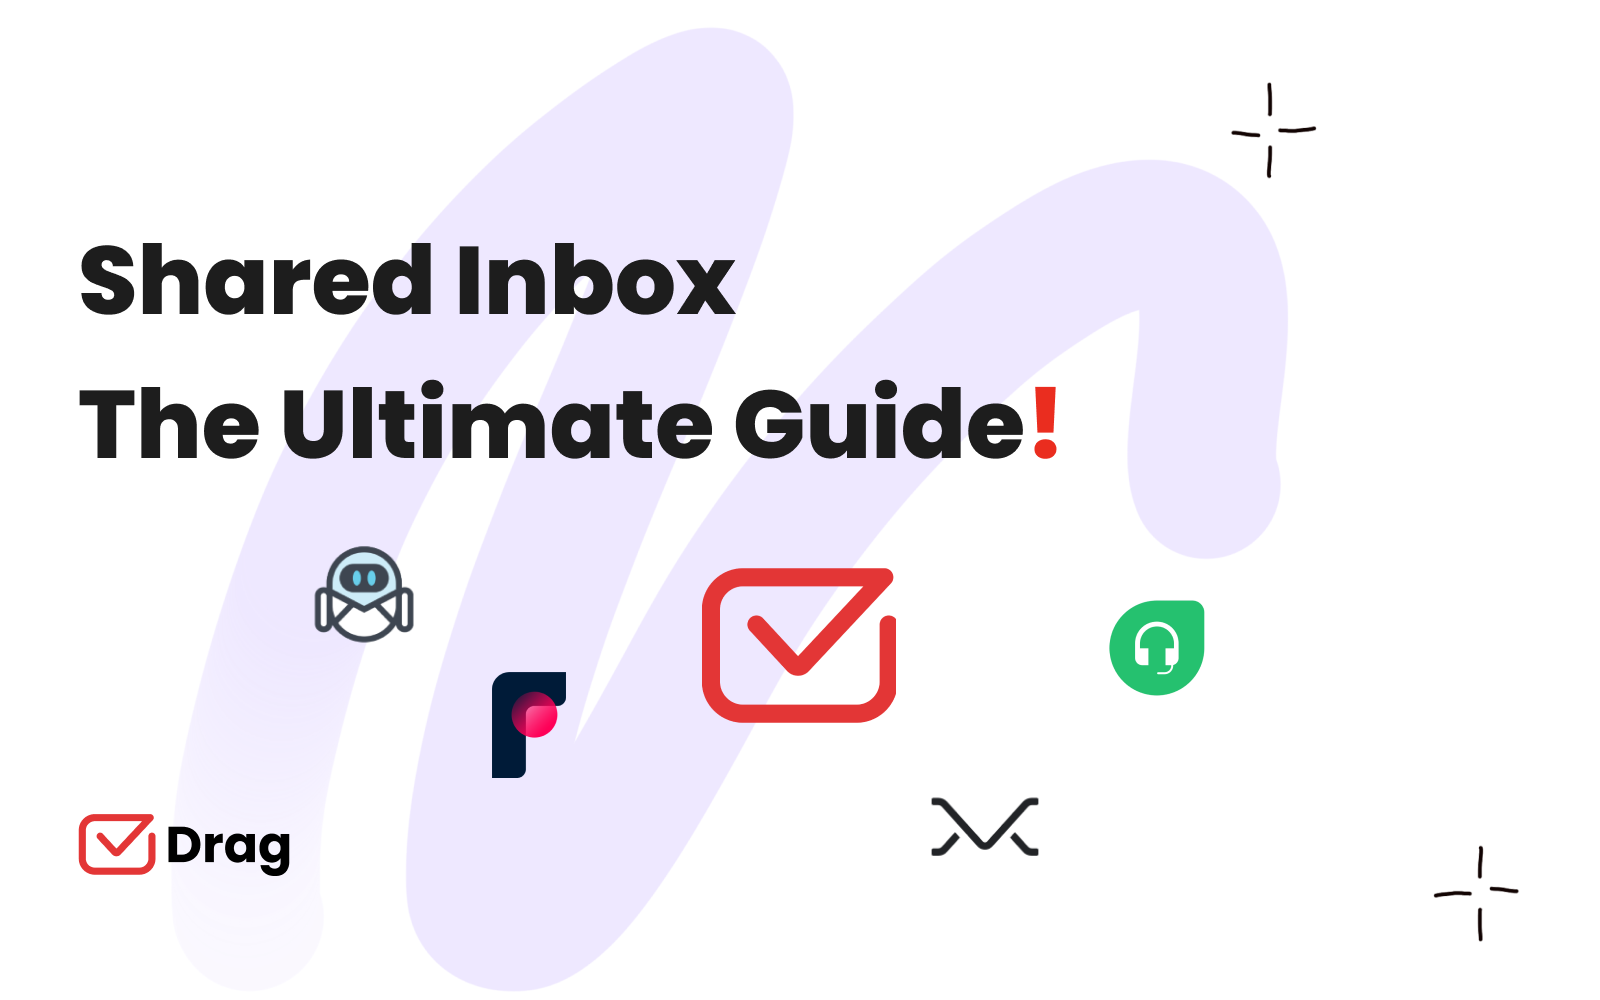 shared inbox the ultimate guide